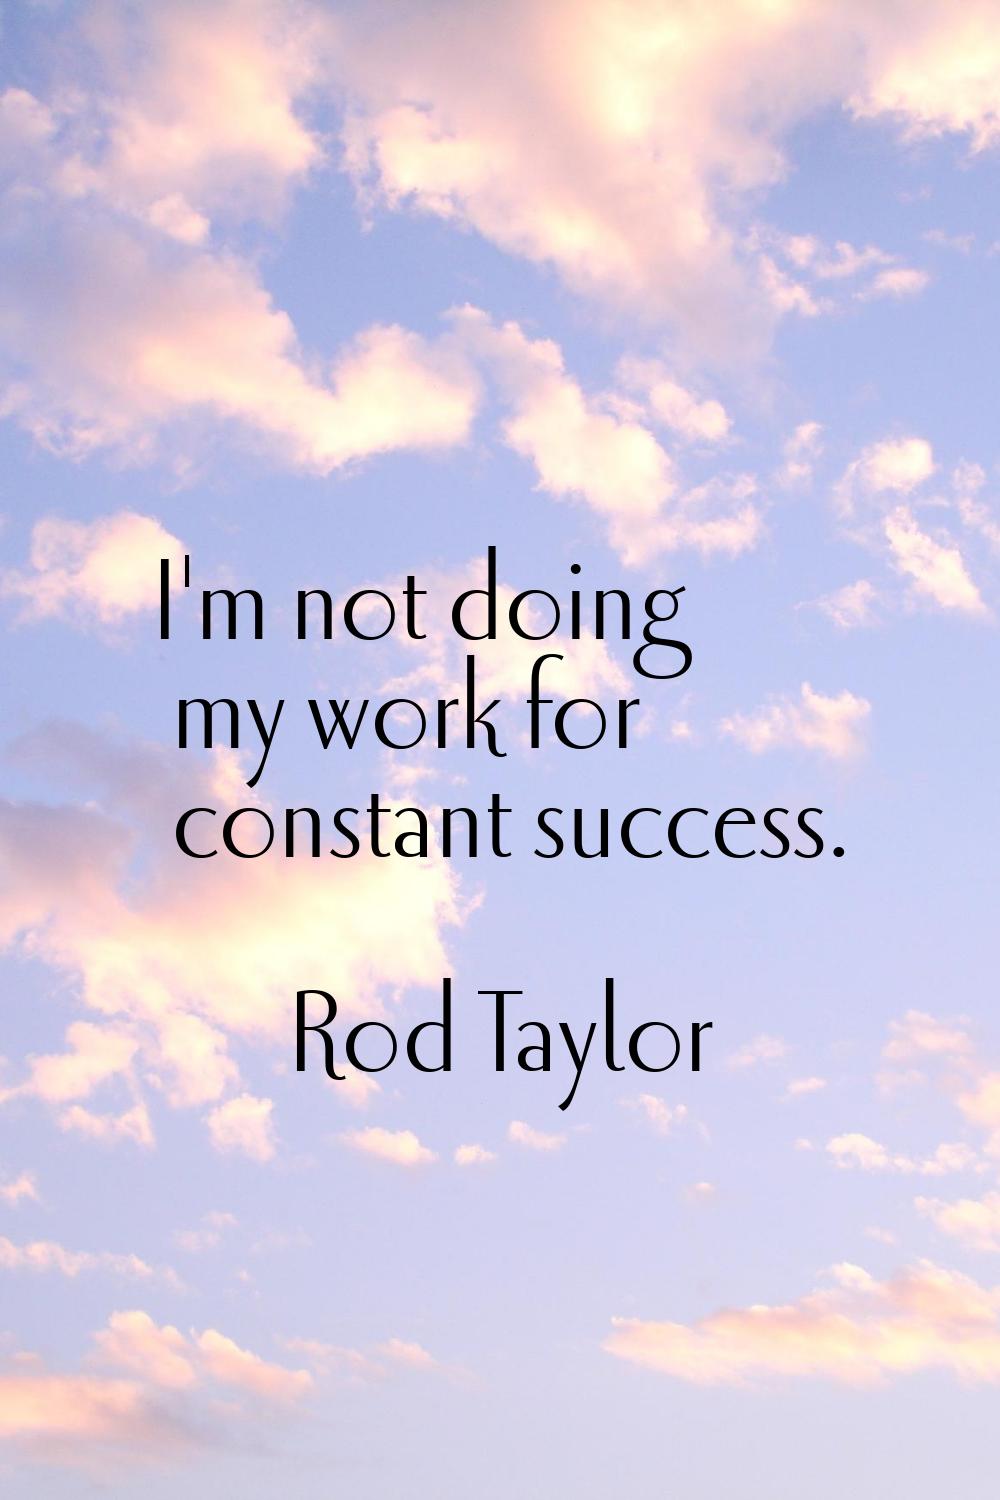 I'm not doing my work for constant success.